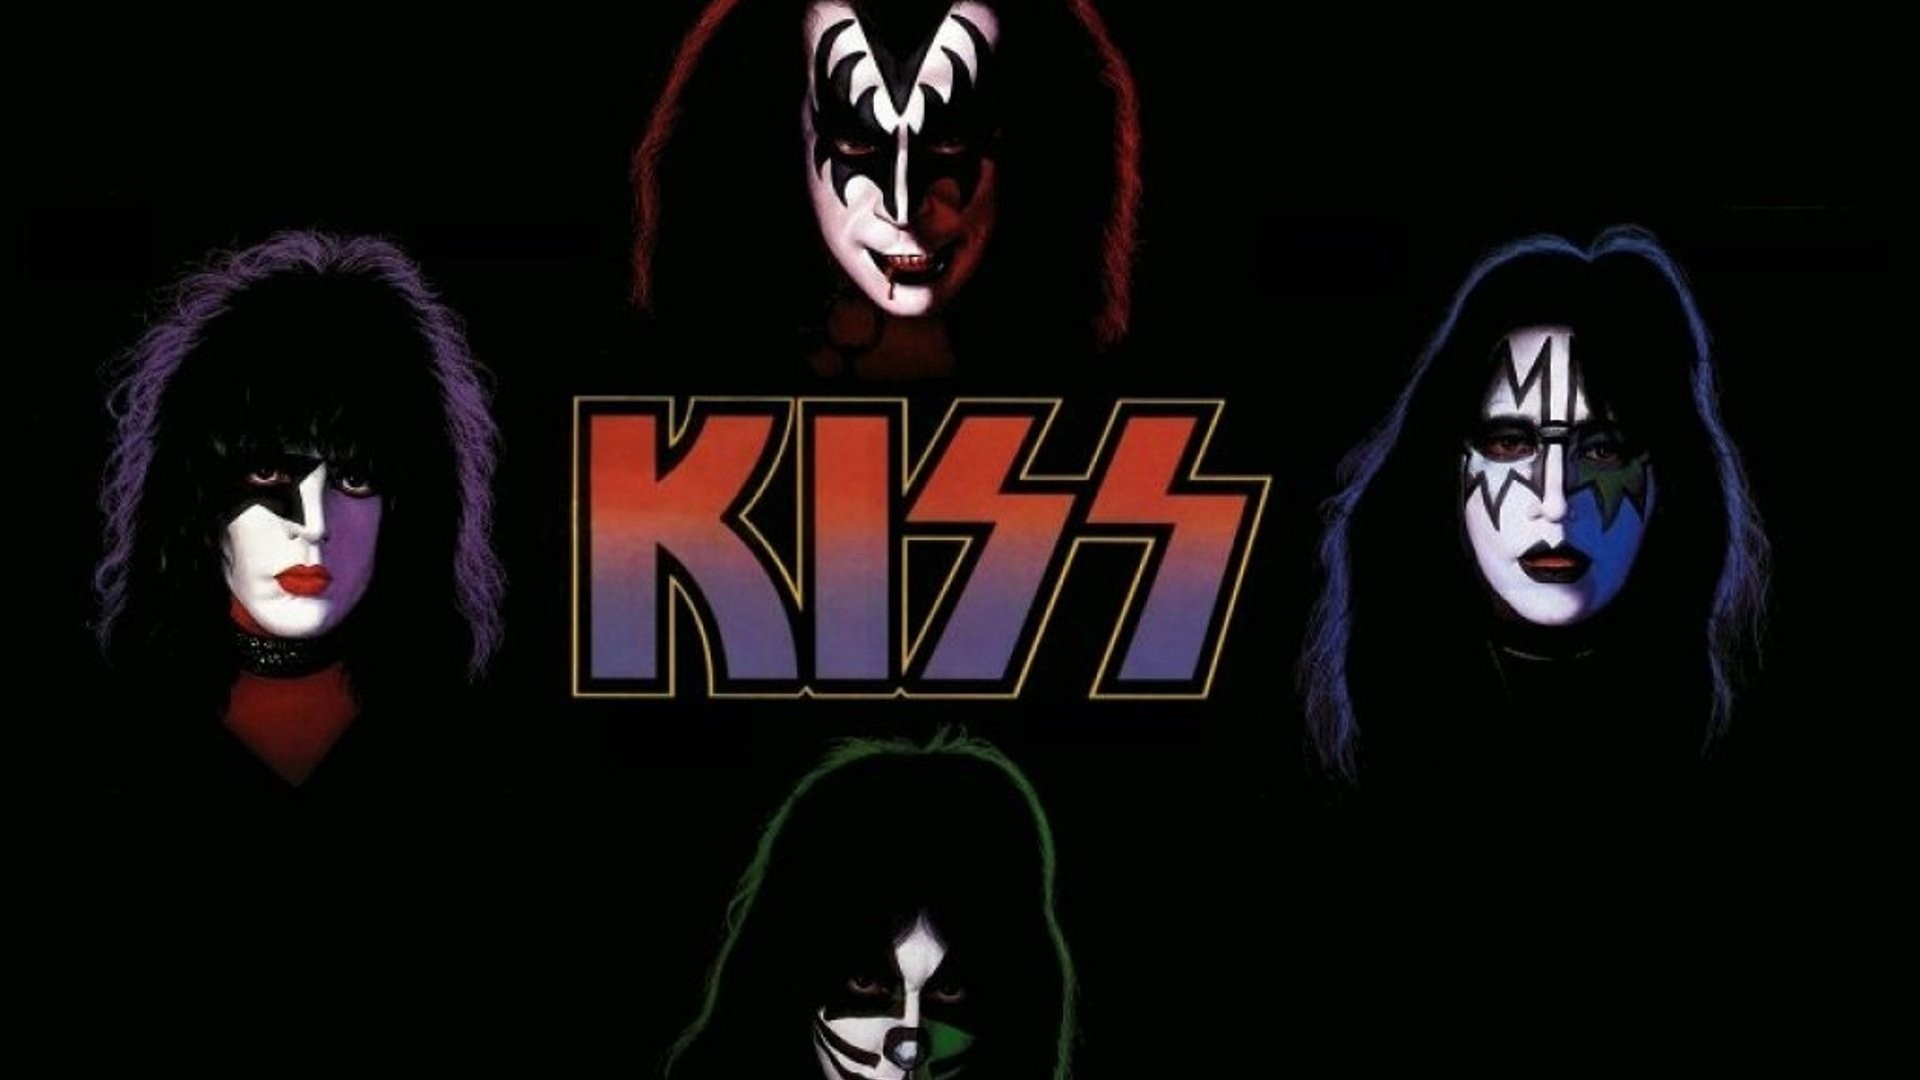 1920x1080 Kiss Band 621188. SHARE. TAGS: Archives Classic Rock Music